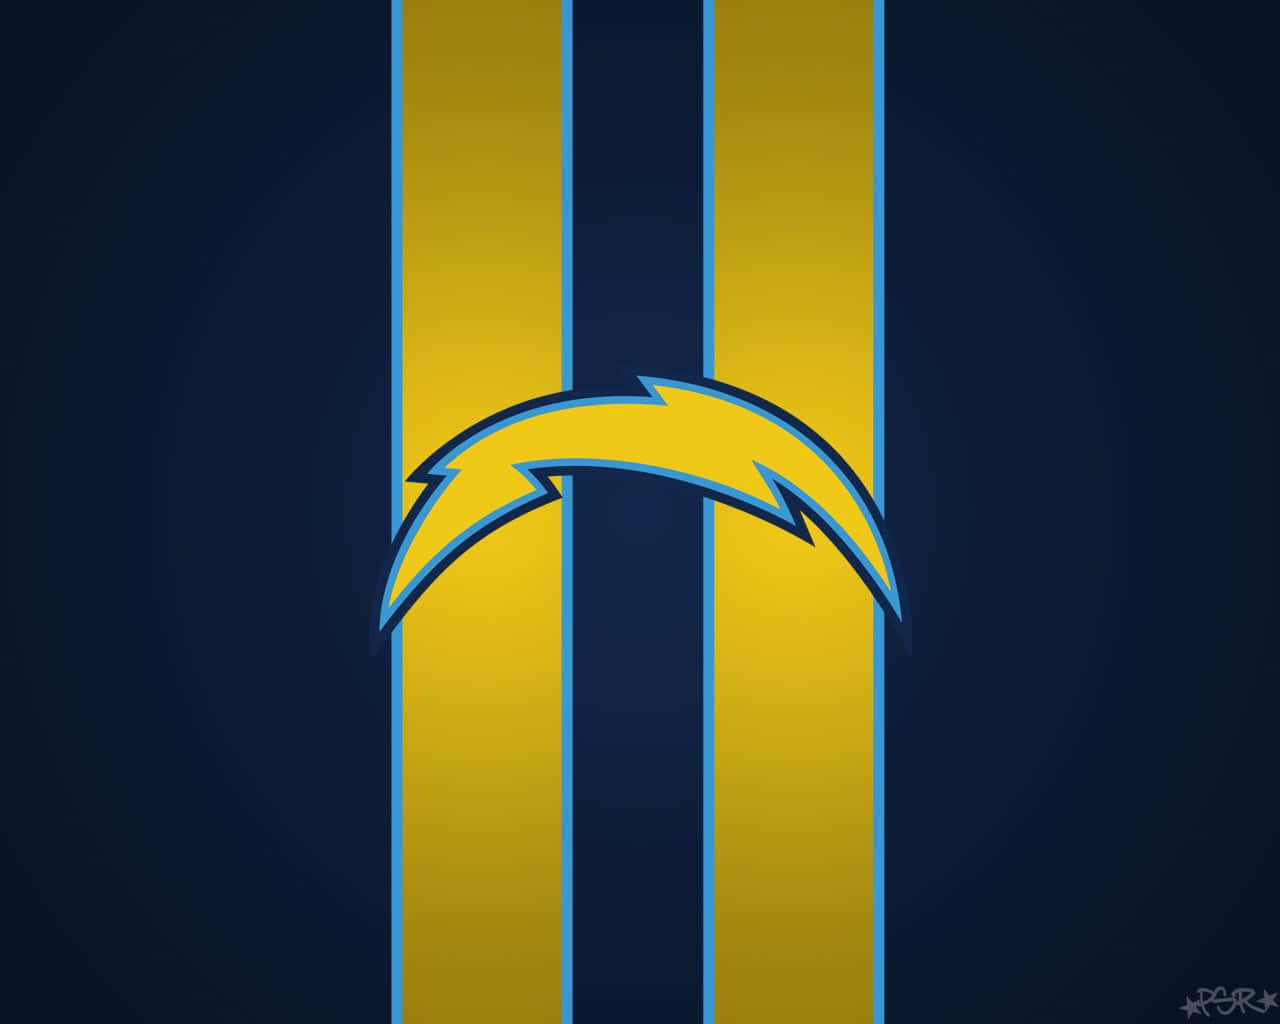 100+] San Diego Chargers Wallpapers